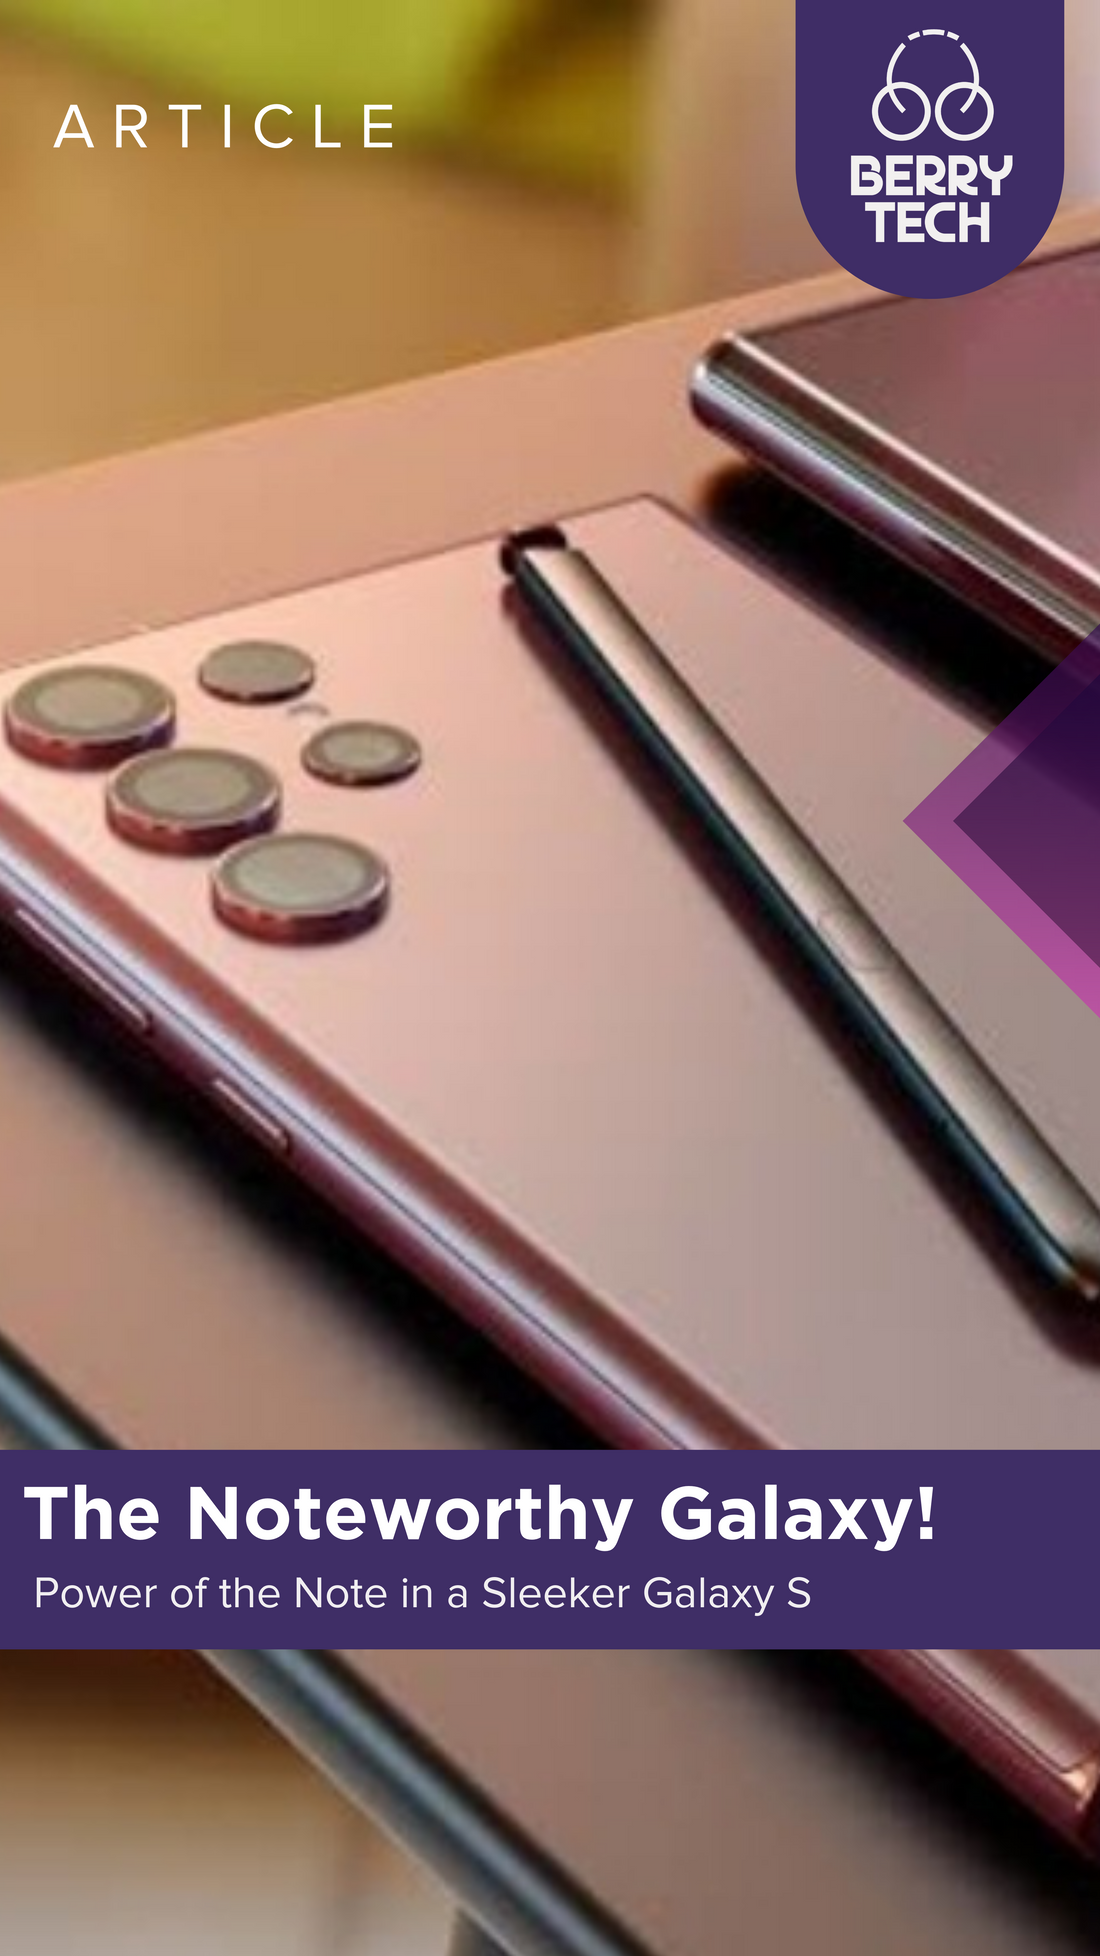 The Noteworthy Galaxy! Power of the Note in a Sleeker Galaxy S